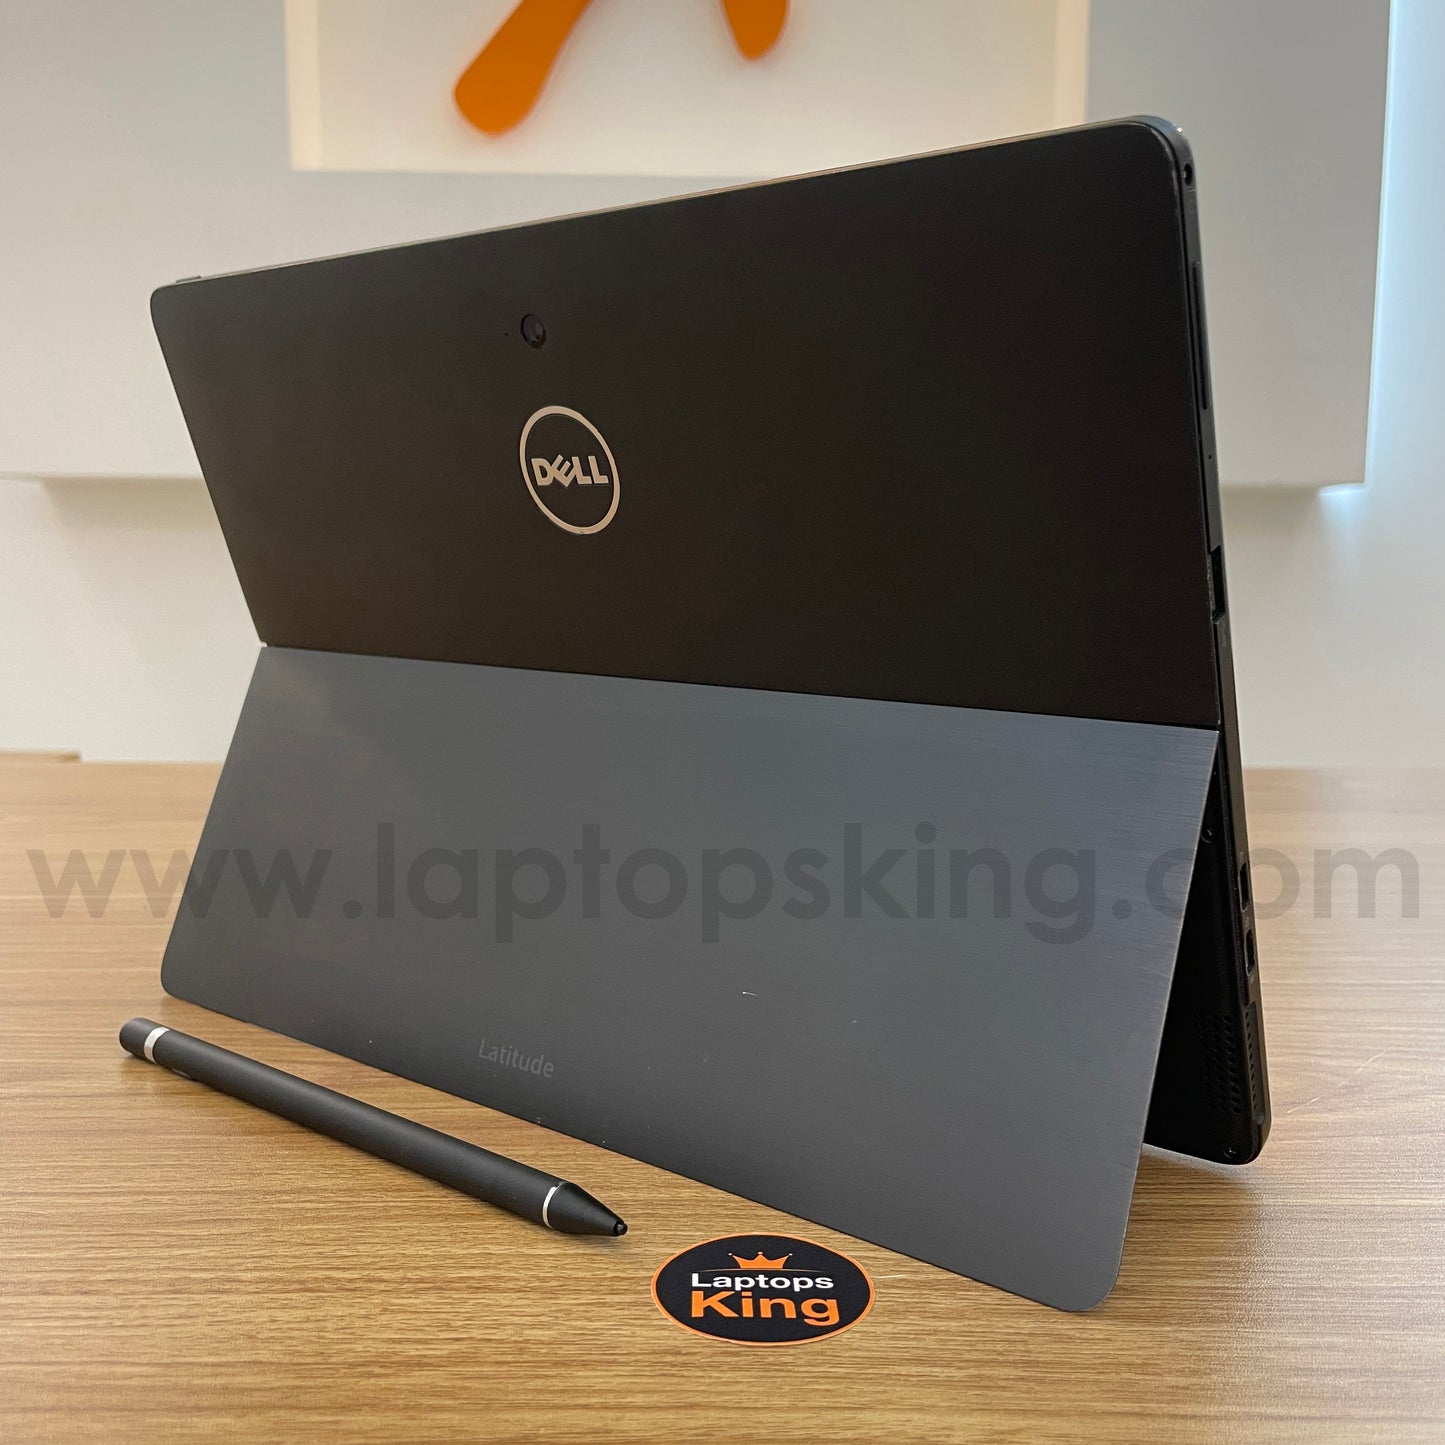 Dell Latitude 5285 2in1 Core i5 Detachable Touch Laptop (Used Very Clean)